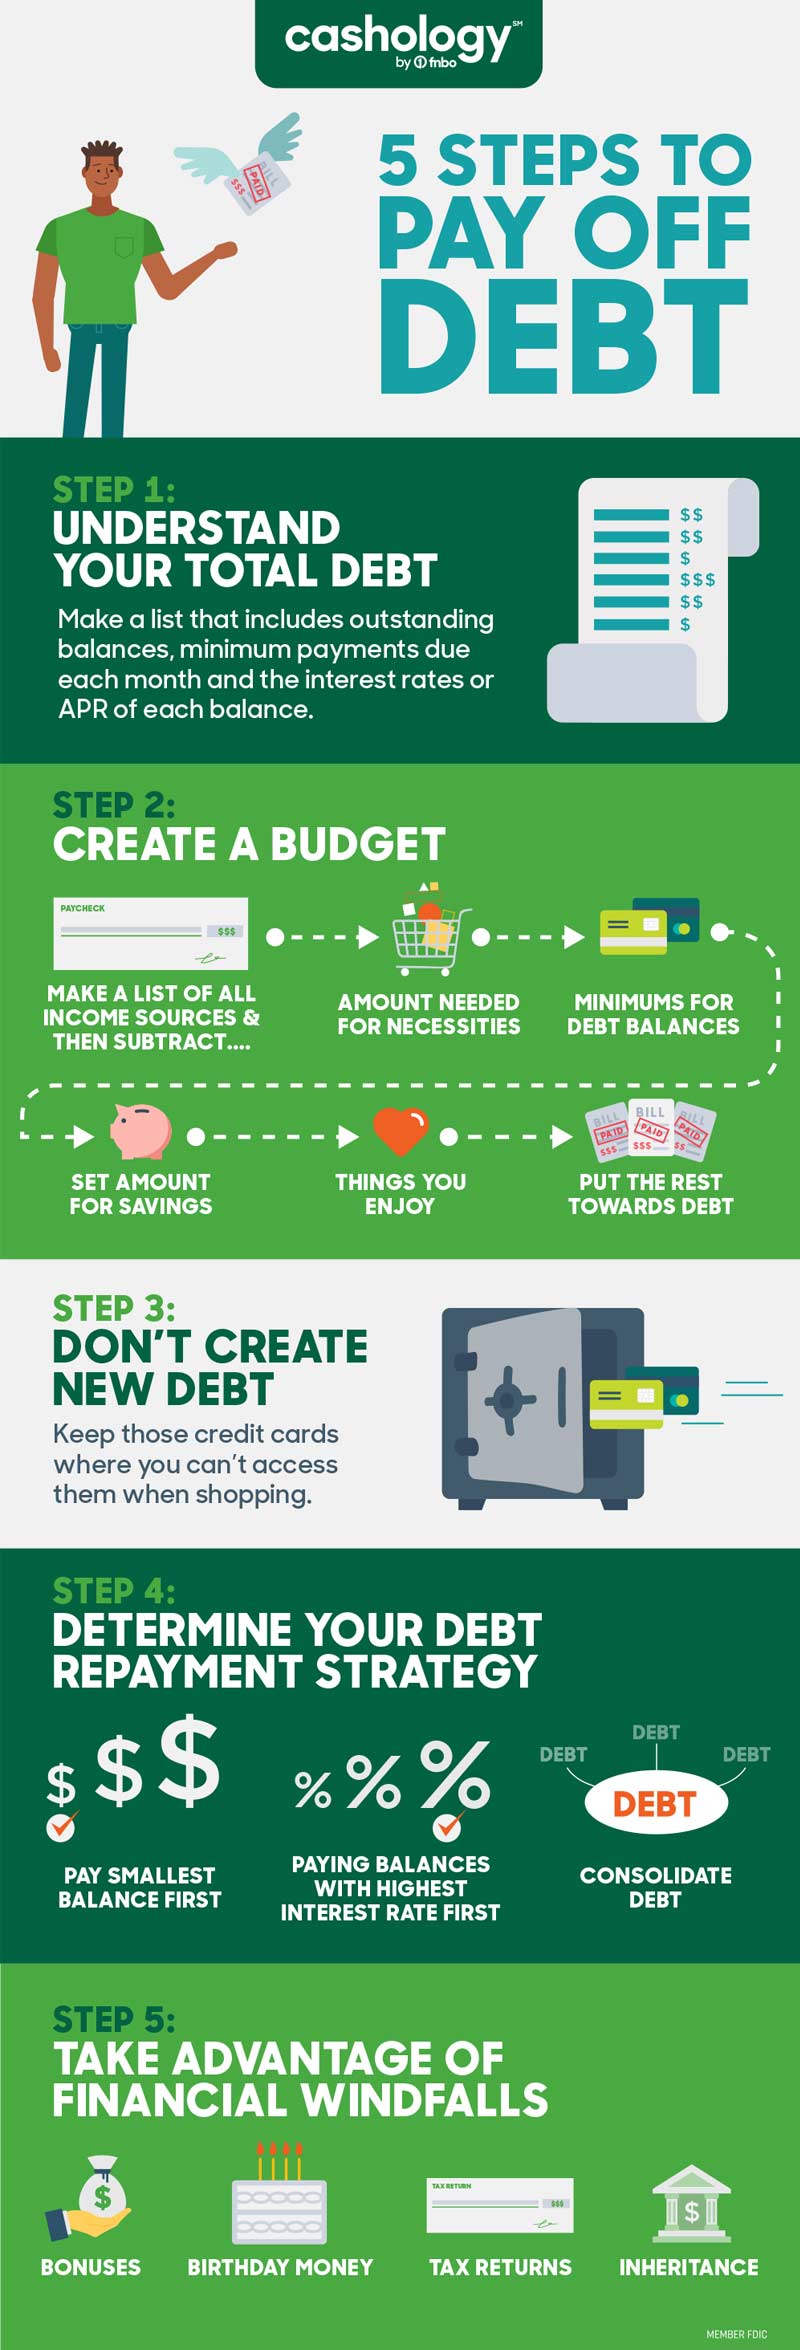 five-steps-to-get-out-of-debt-infographic-800.jpg